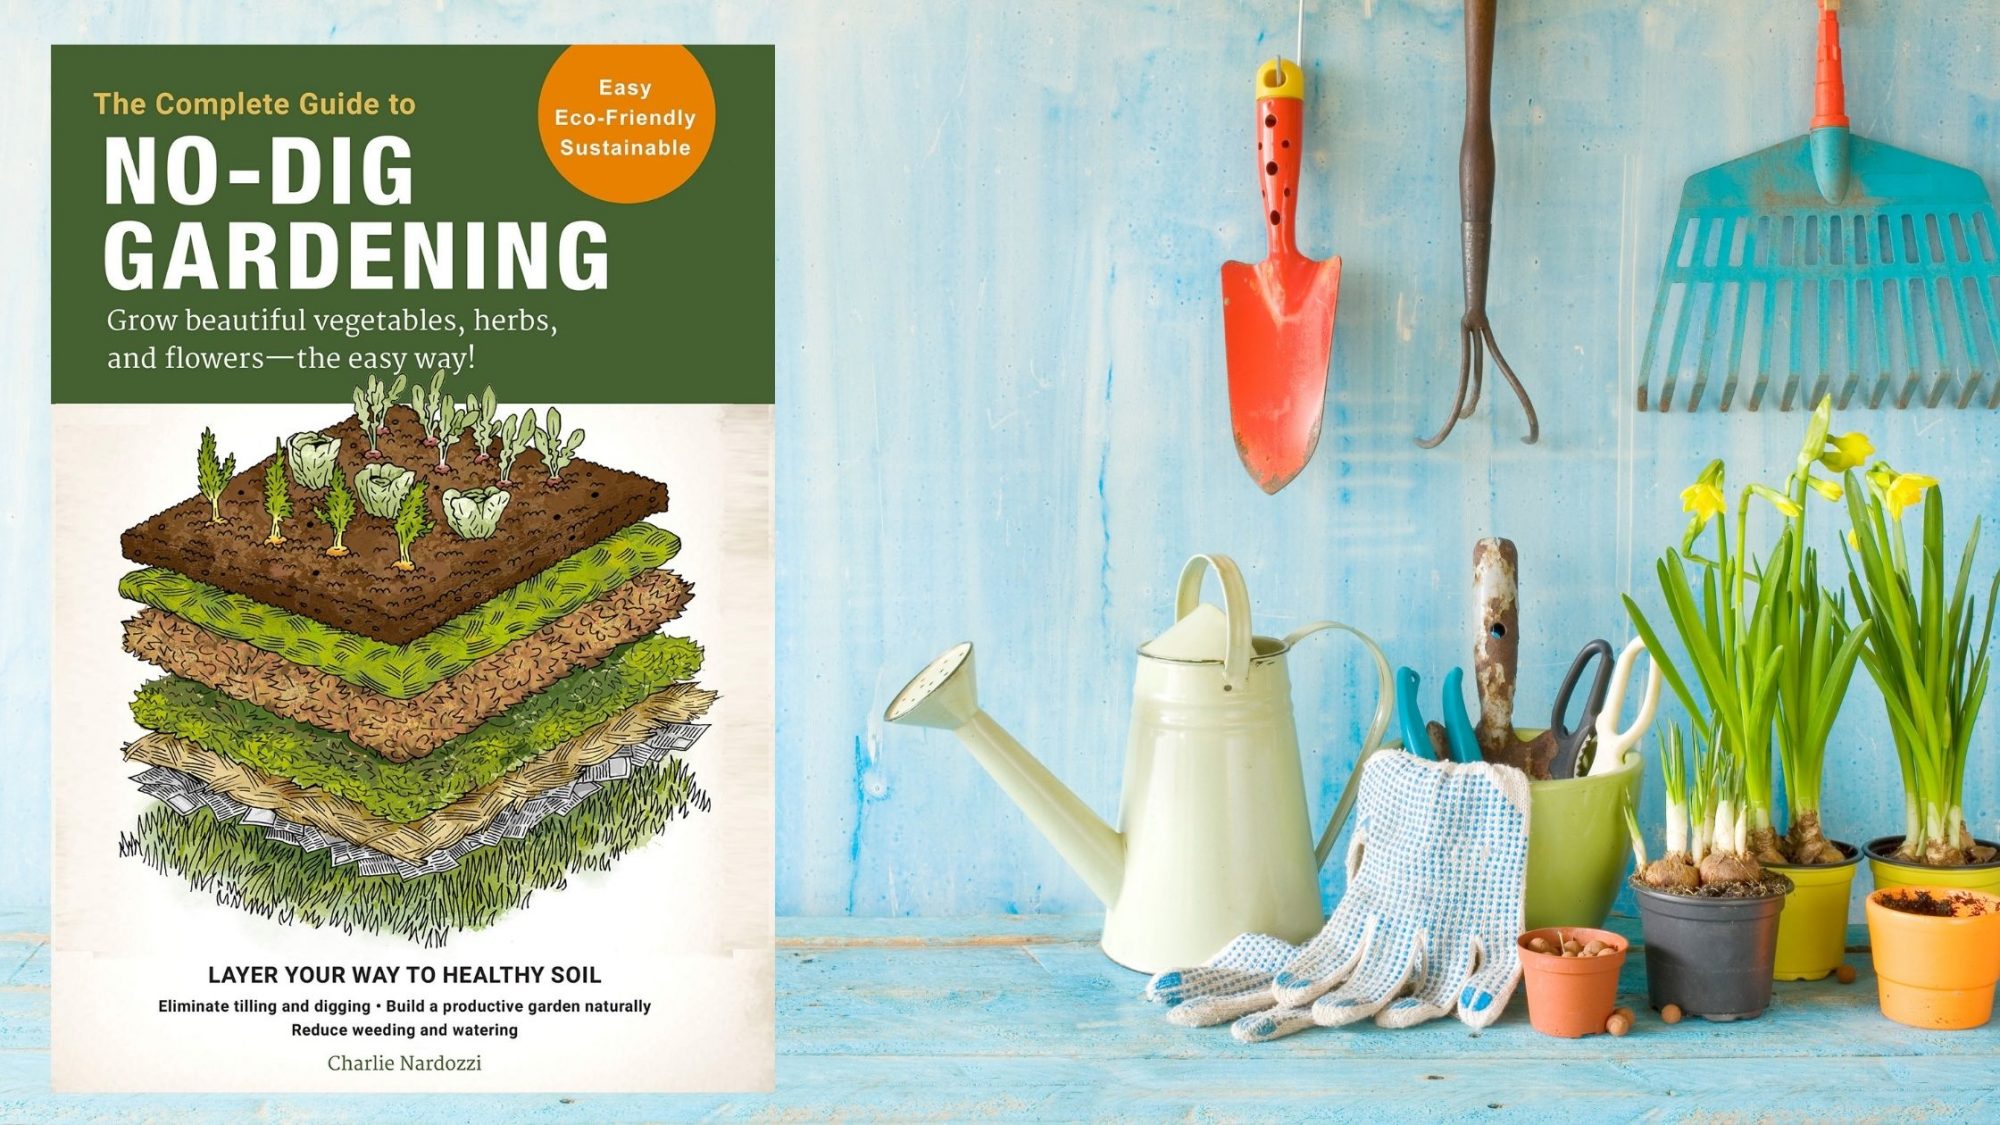 gardening supplies and the cover of the no-dig gardening book